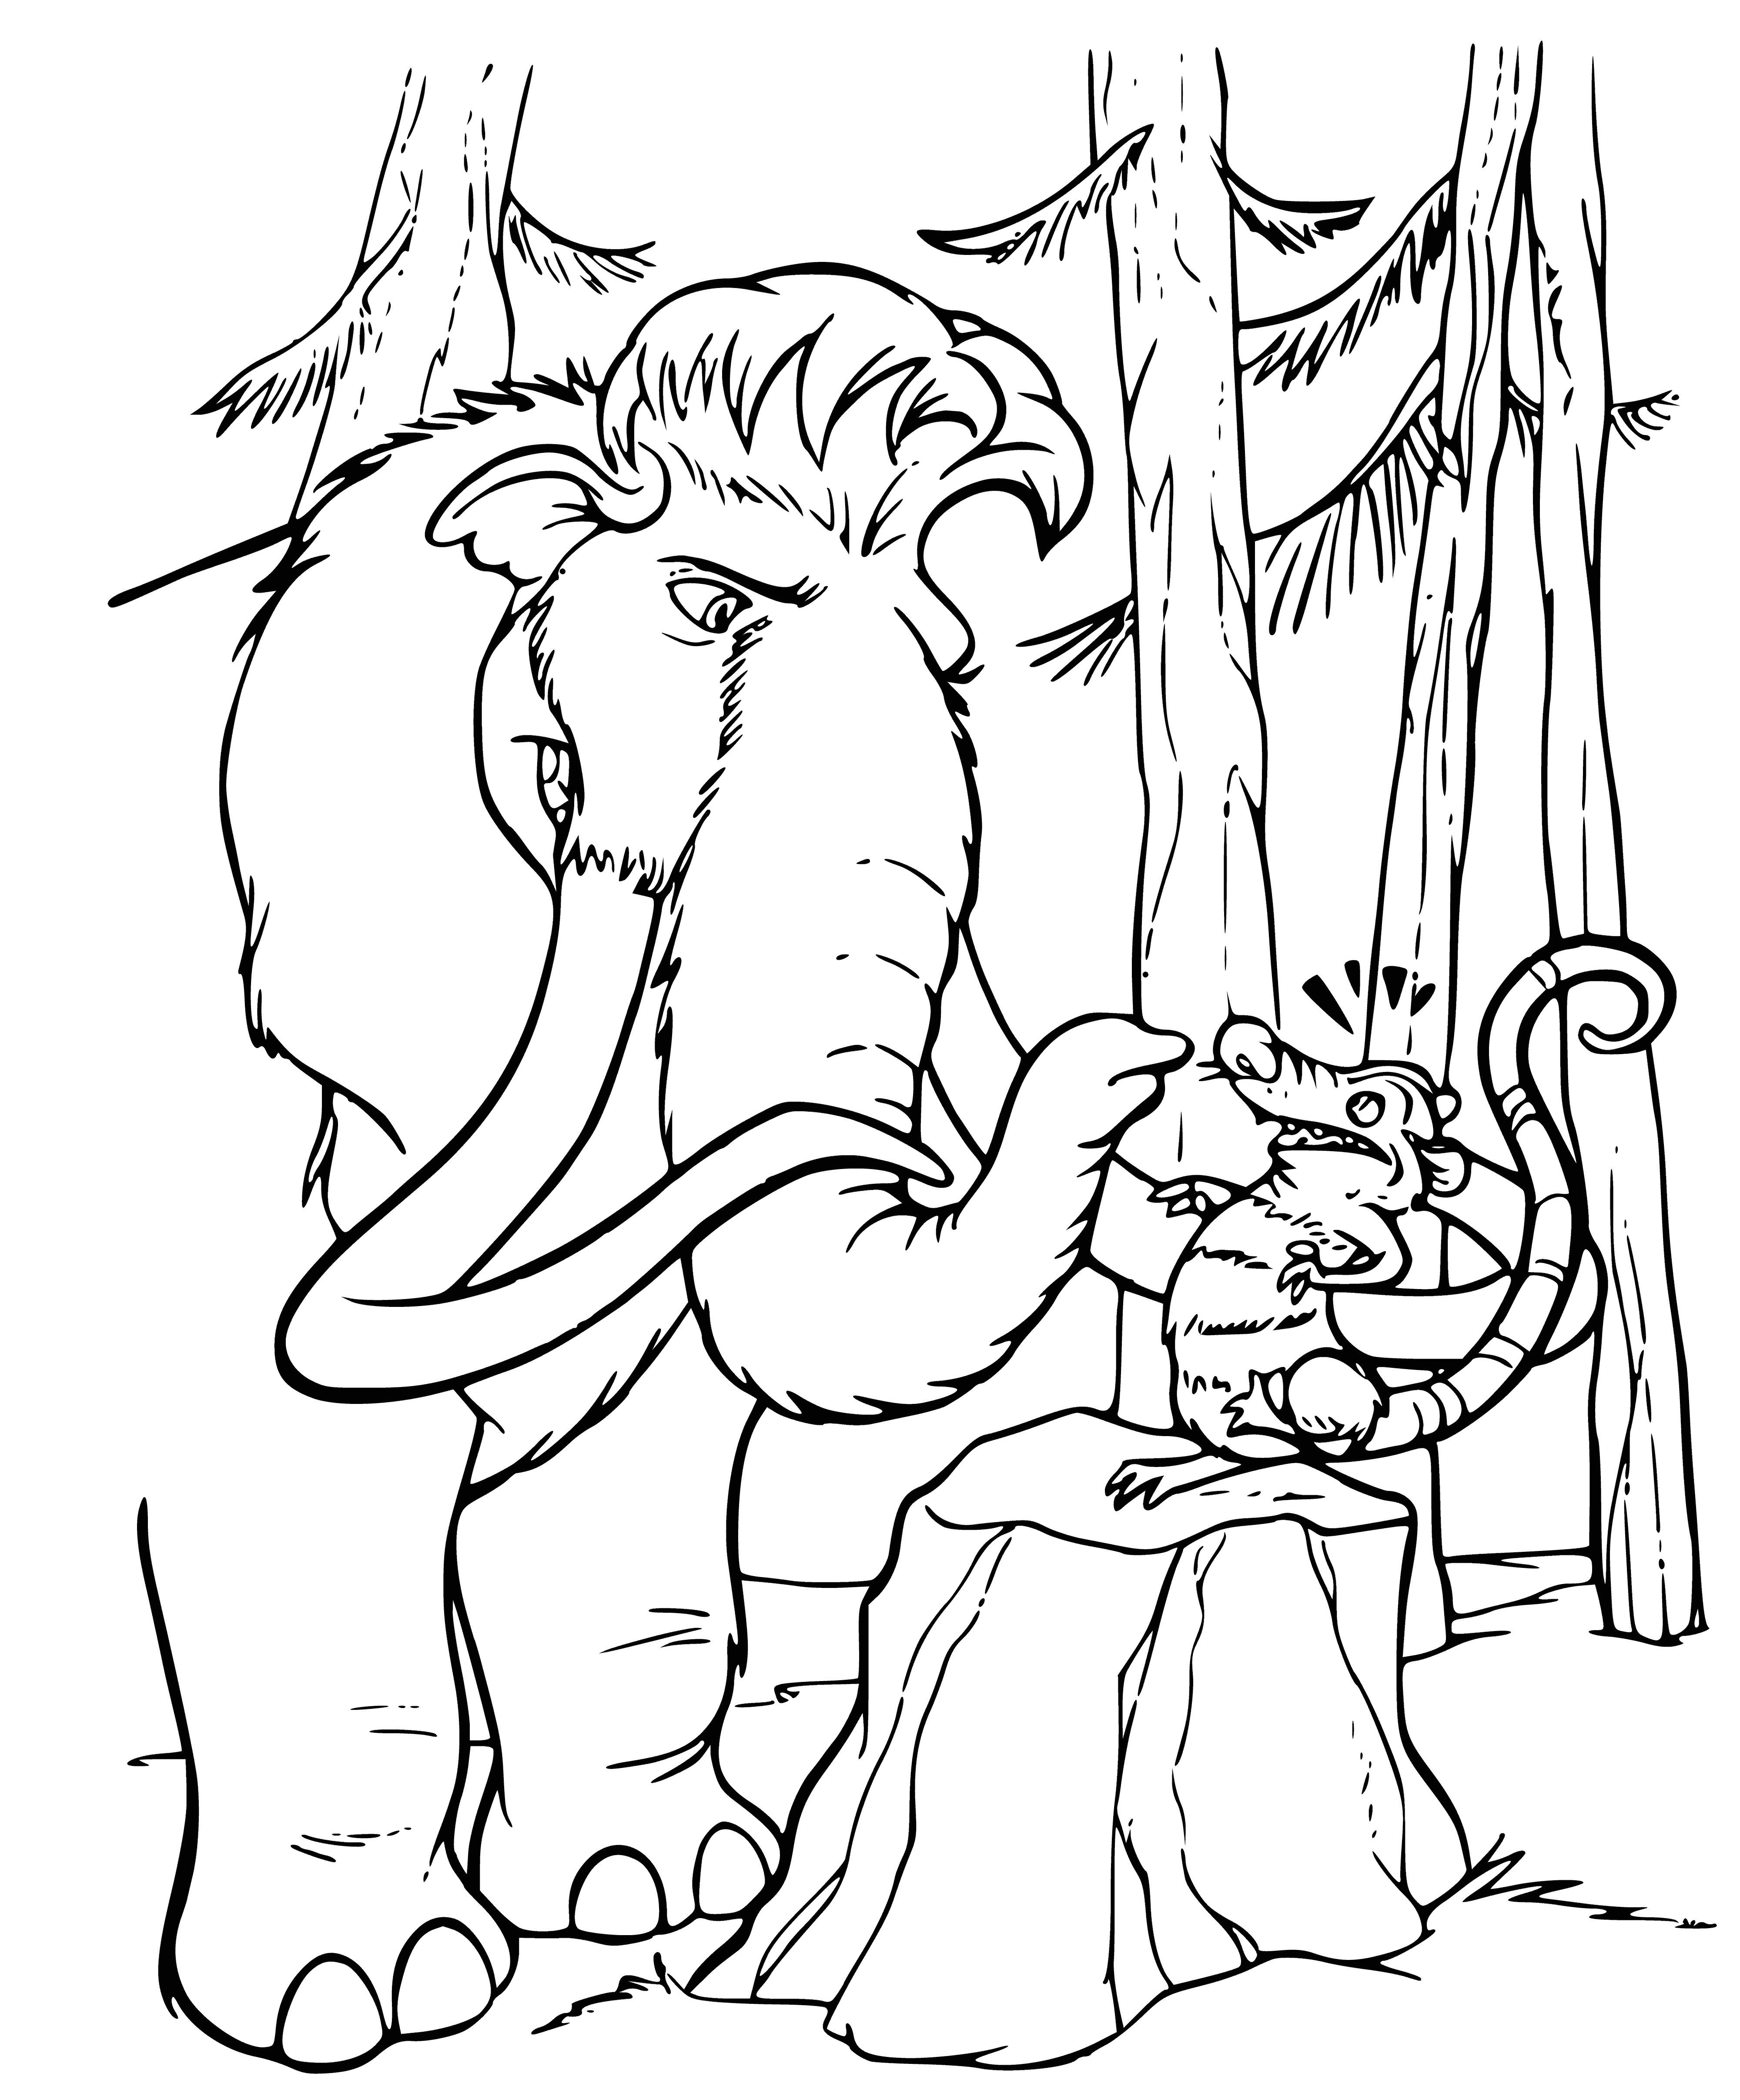 coloring page: Manny, a mammoth wearing a blue scarf, is walking through snow with a possum on his back. It has a white belly, black back and long tail.